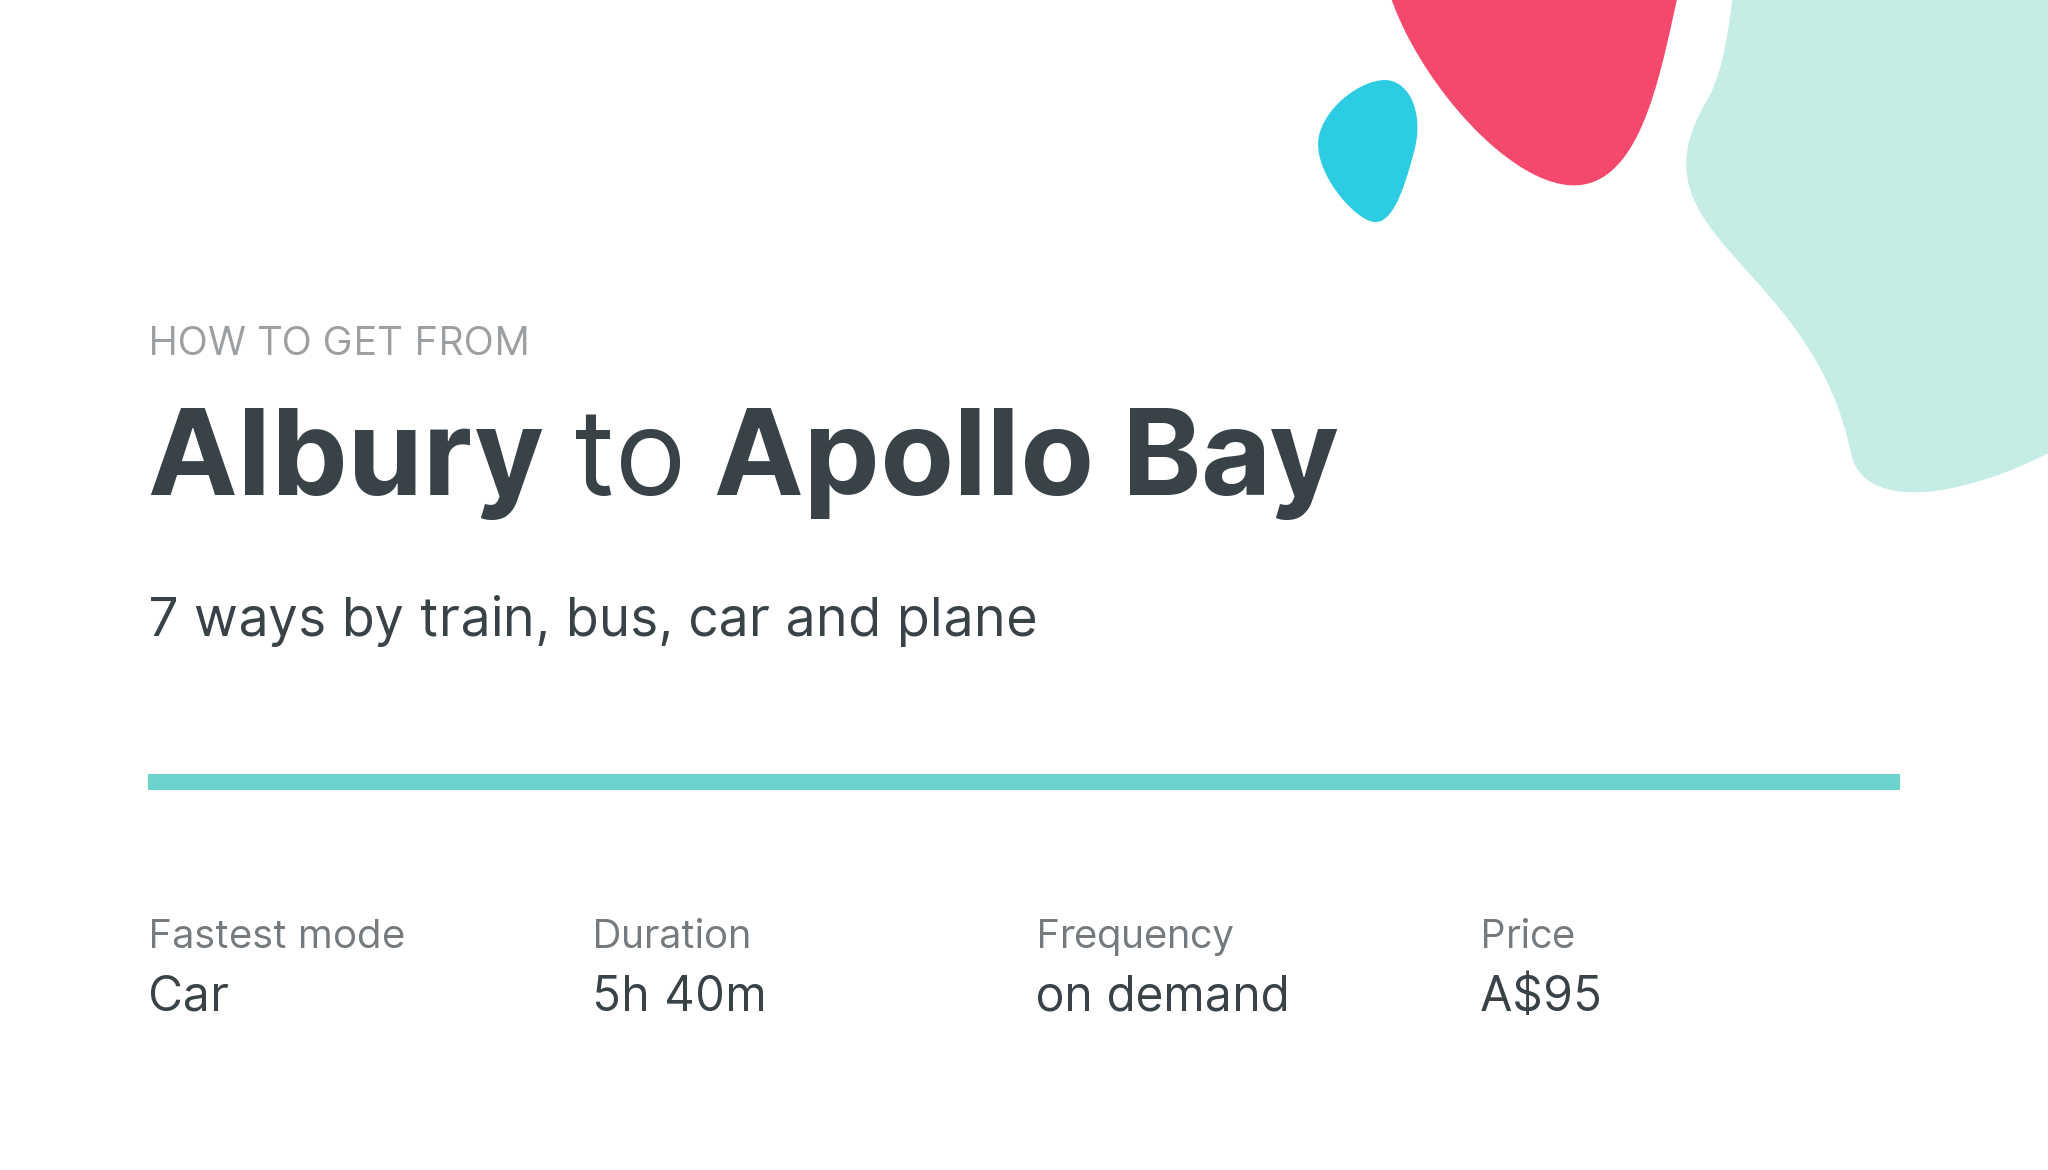 How do I get from Albury to Apollo Bay